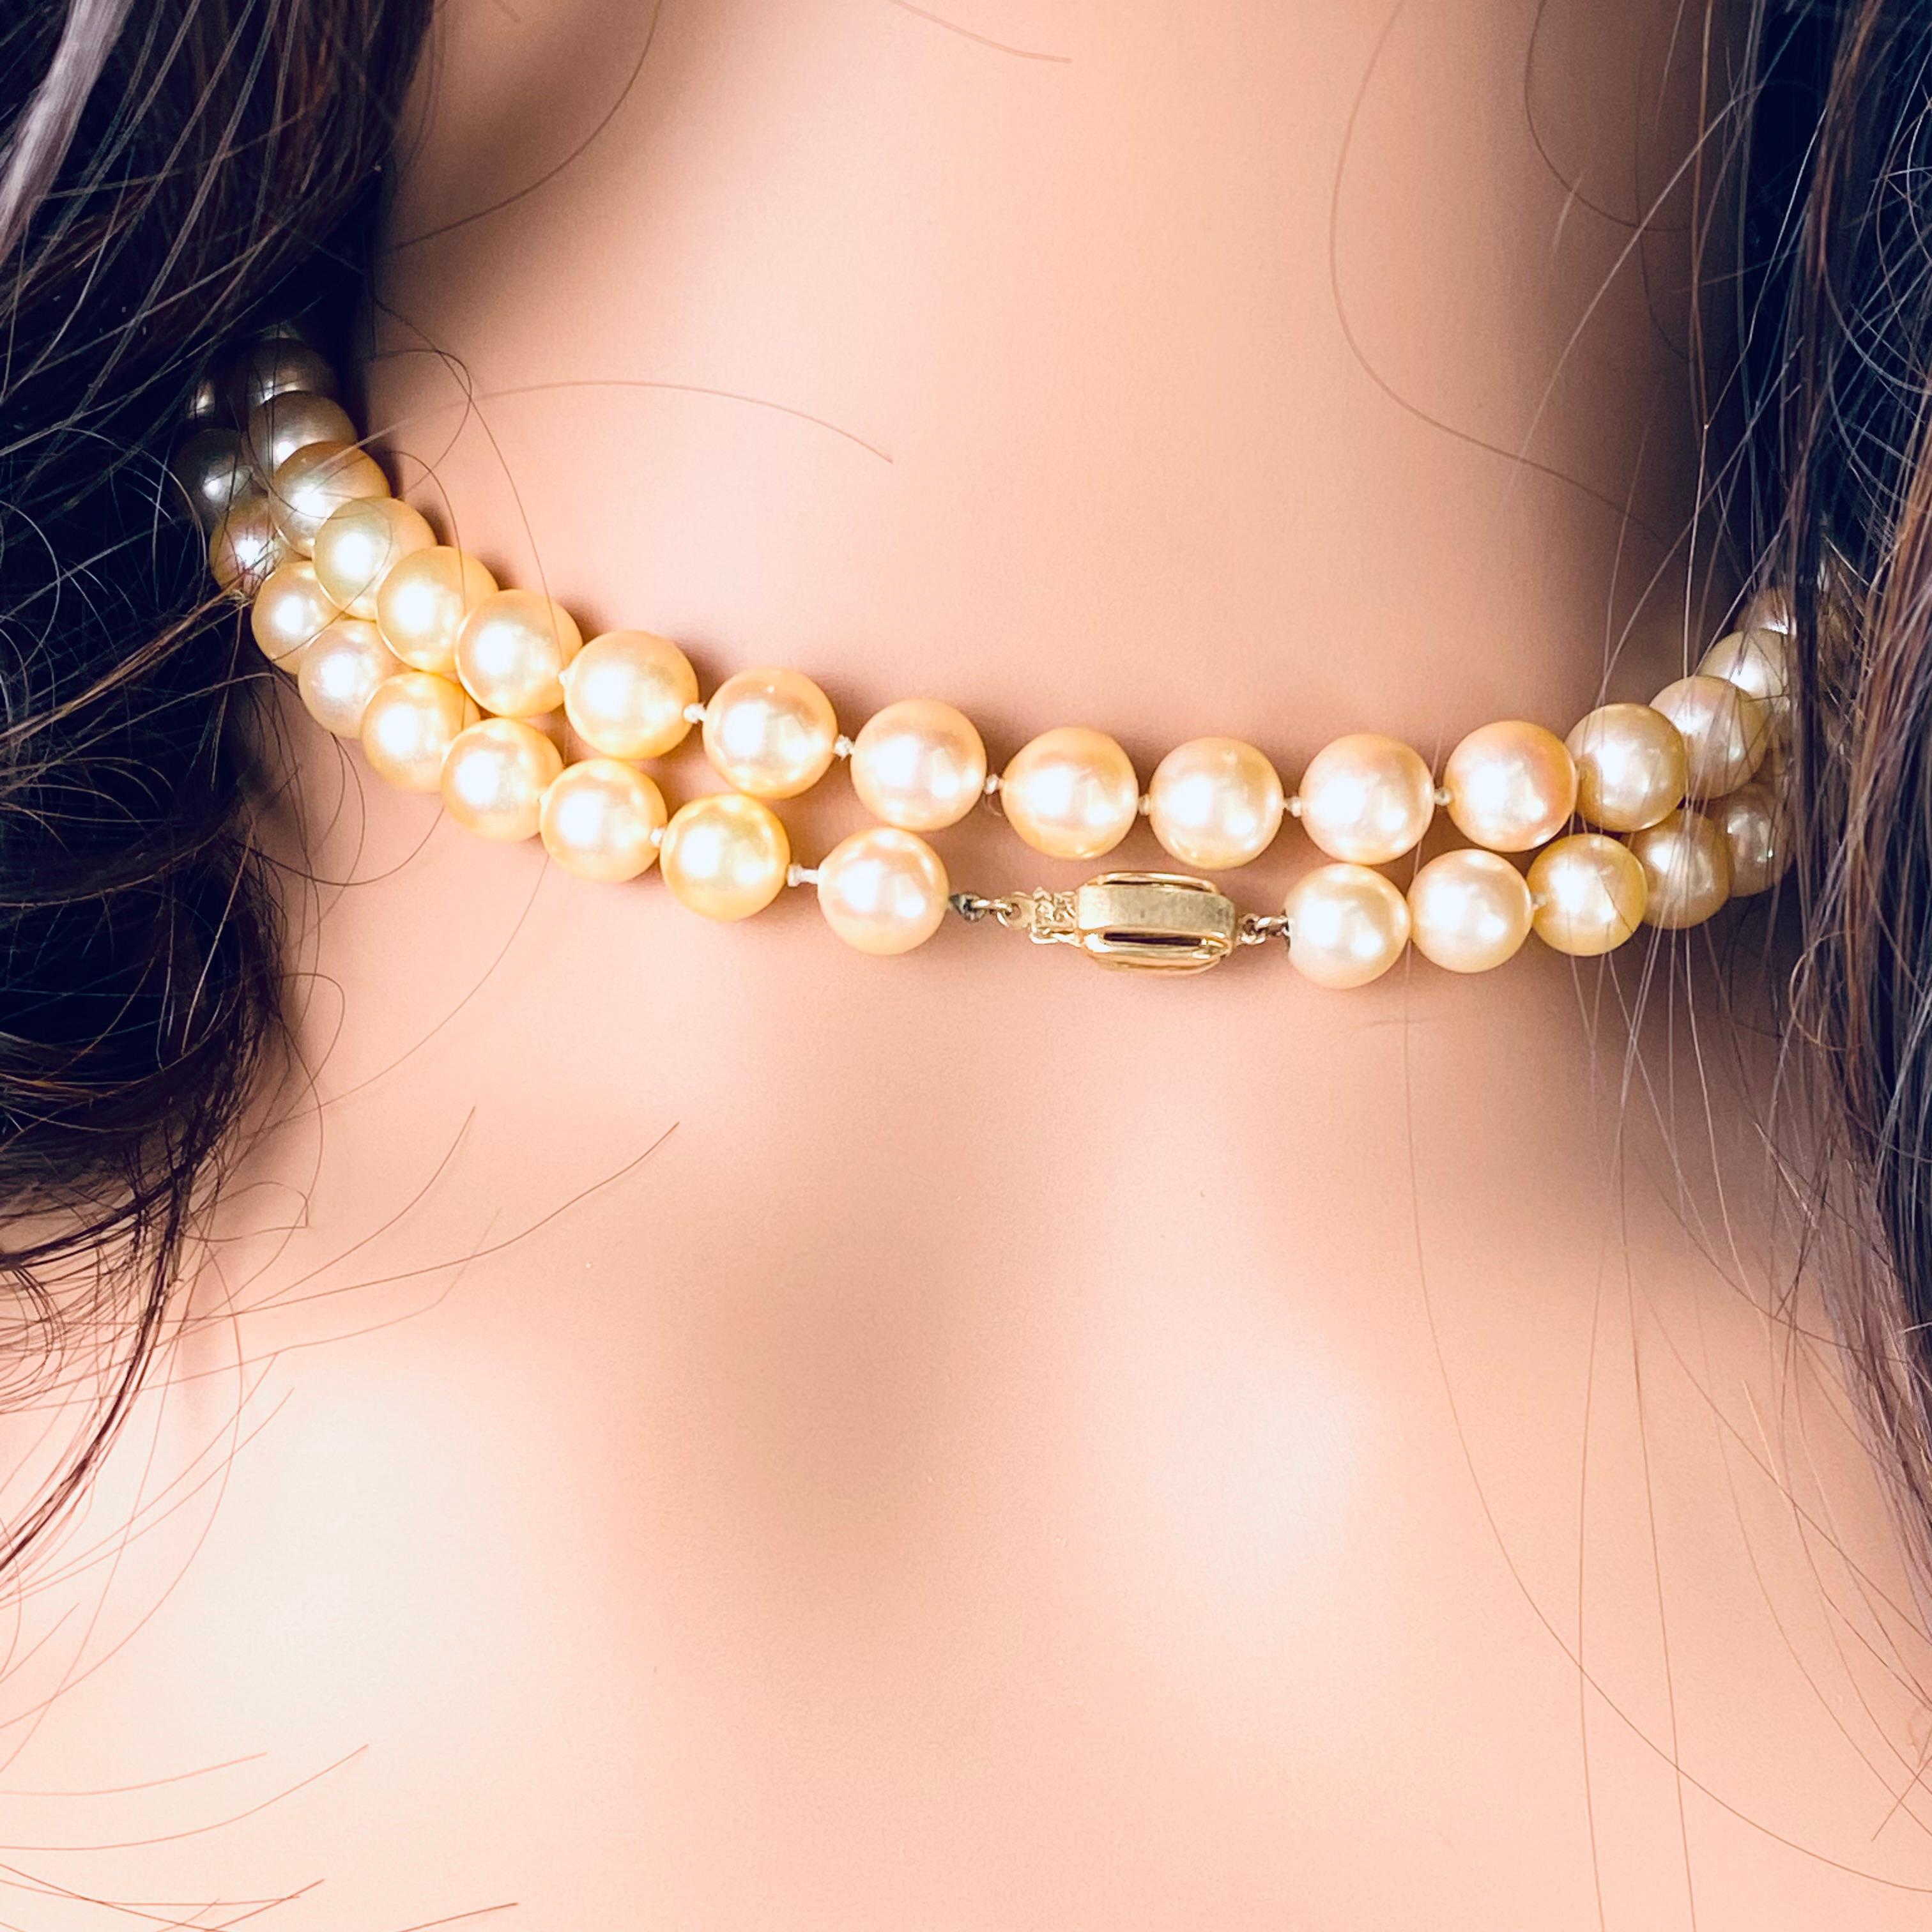 Vintage 1970s Double Strand Cultured Pearl Necklace - Creamy Beige Golden Hue, 30-Inch Length, 14K Yellow Gold Clasp
Description:
Step back into the glamorous era of the 1970s with this exquisite double strand cultured pearl necklace. Crafted with